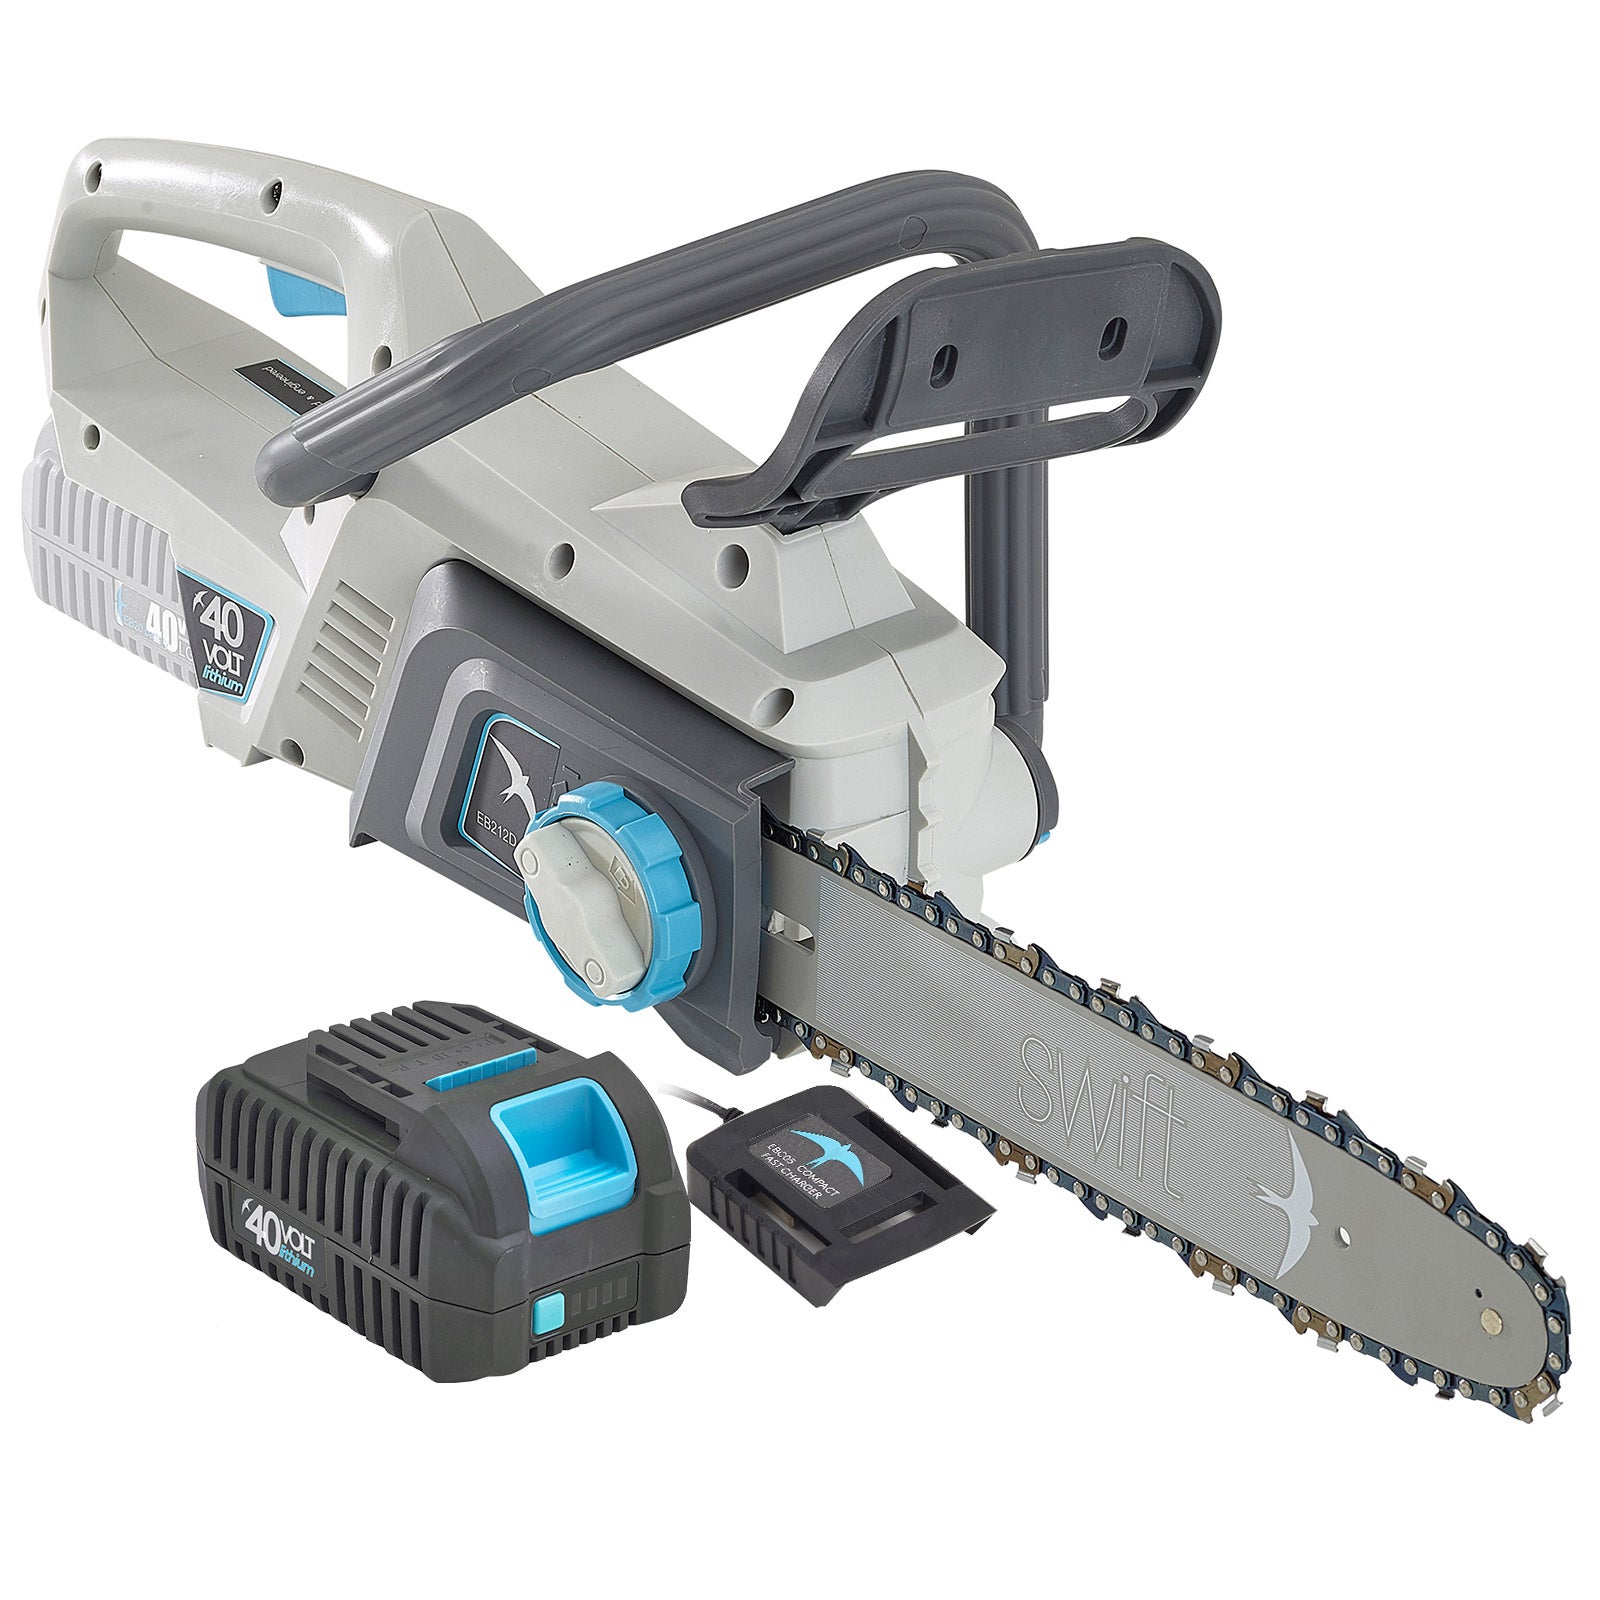 40v CORDLESS BATTERY CHAIN SAW (Include battery and charger)